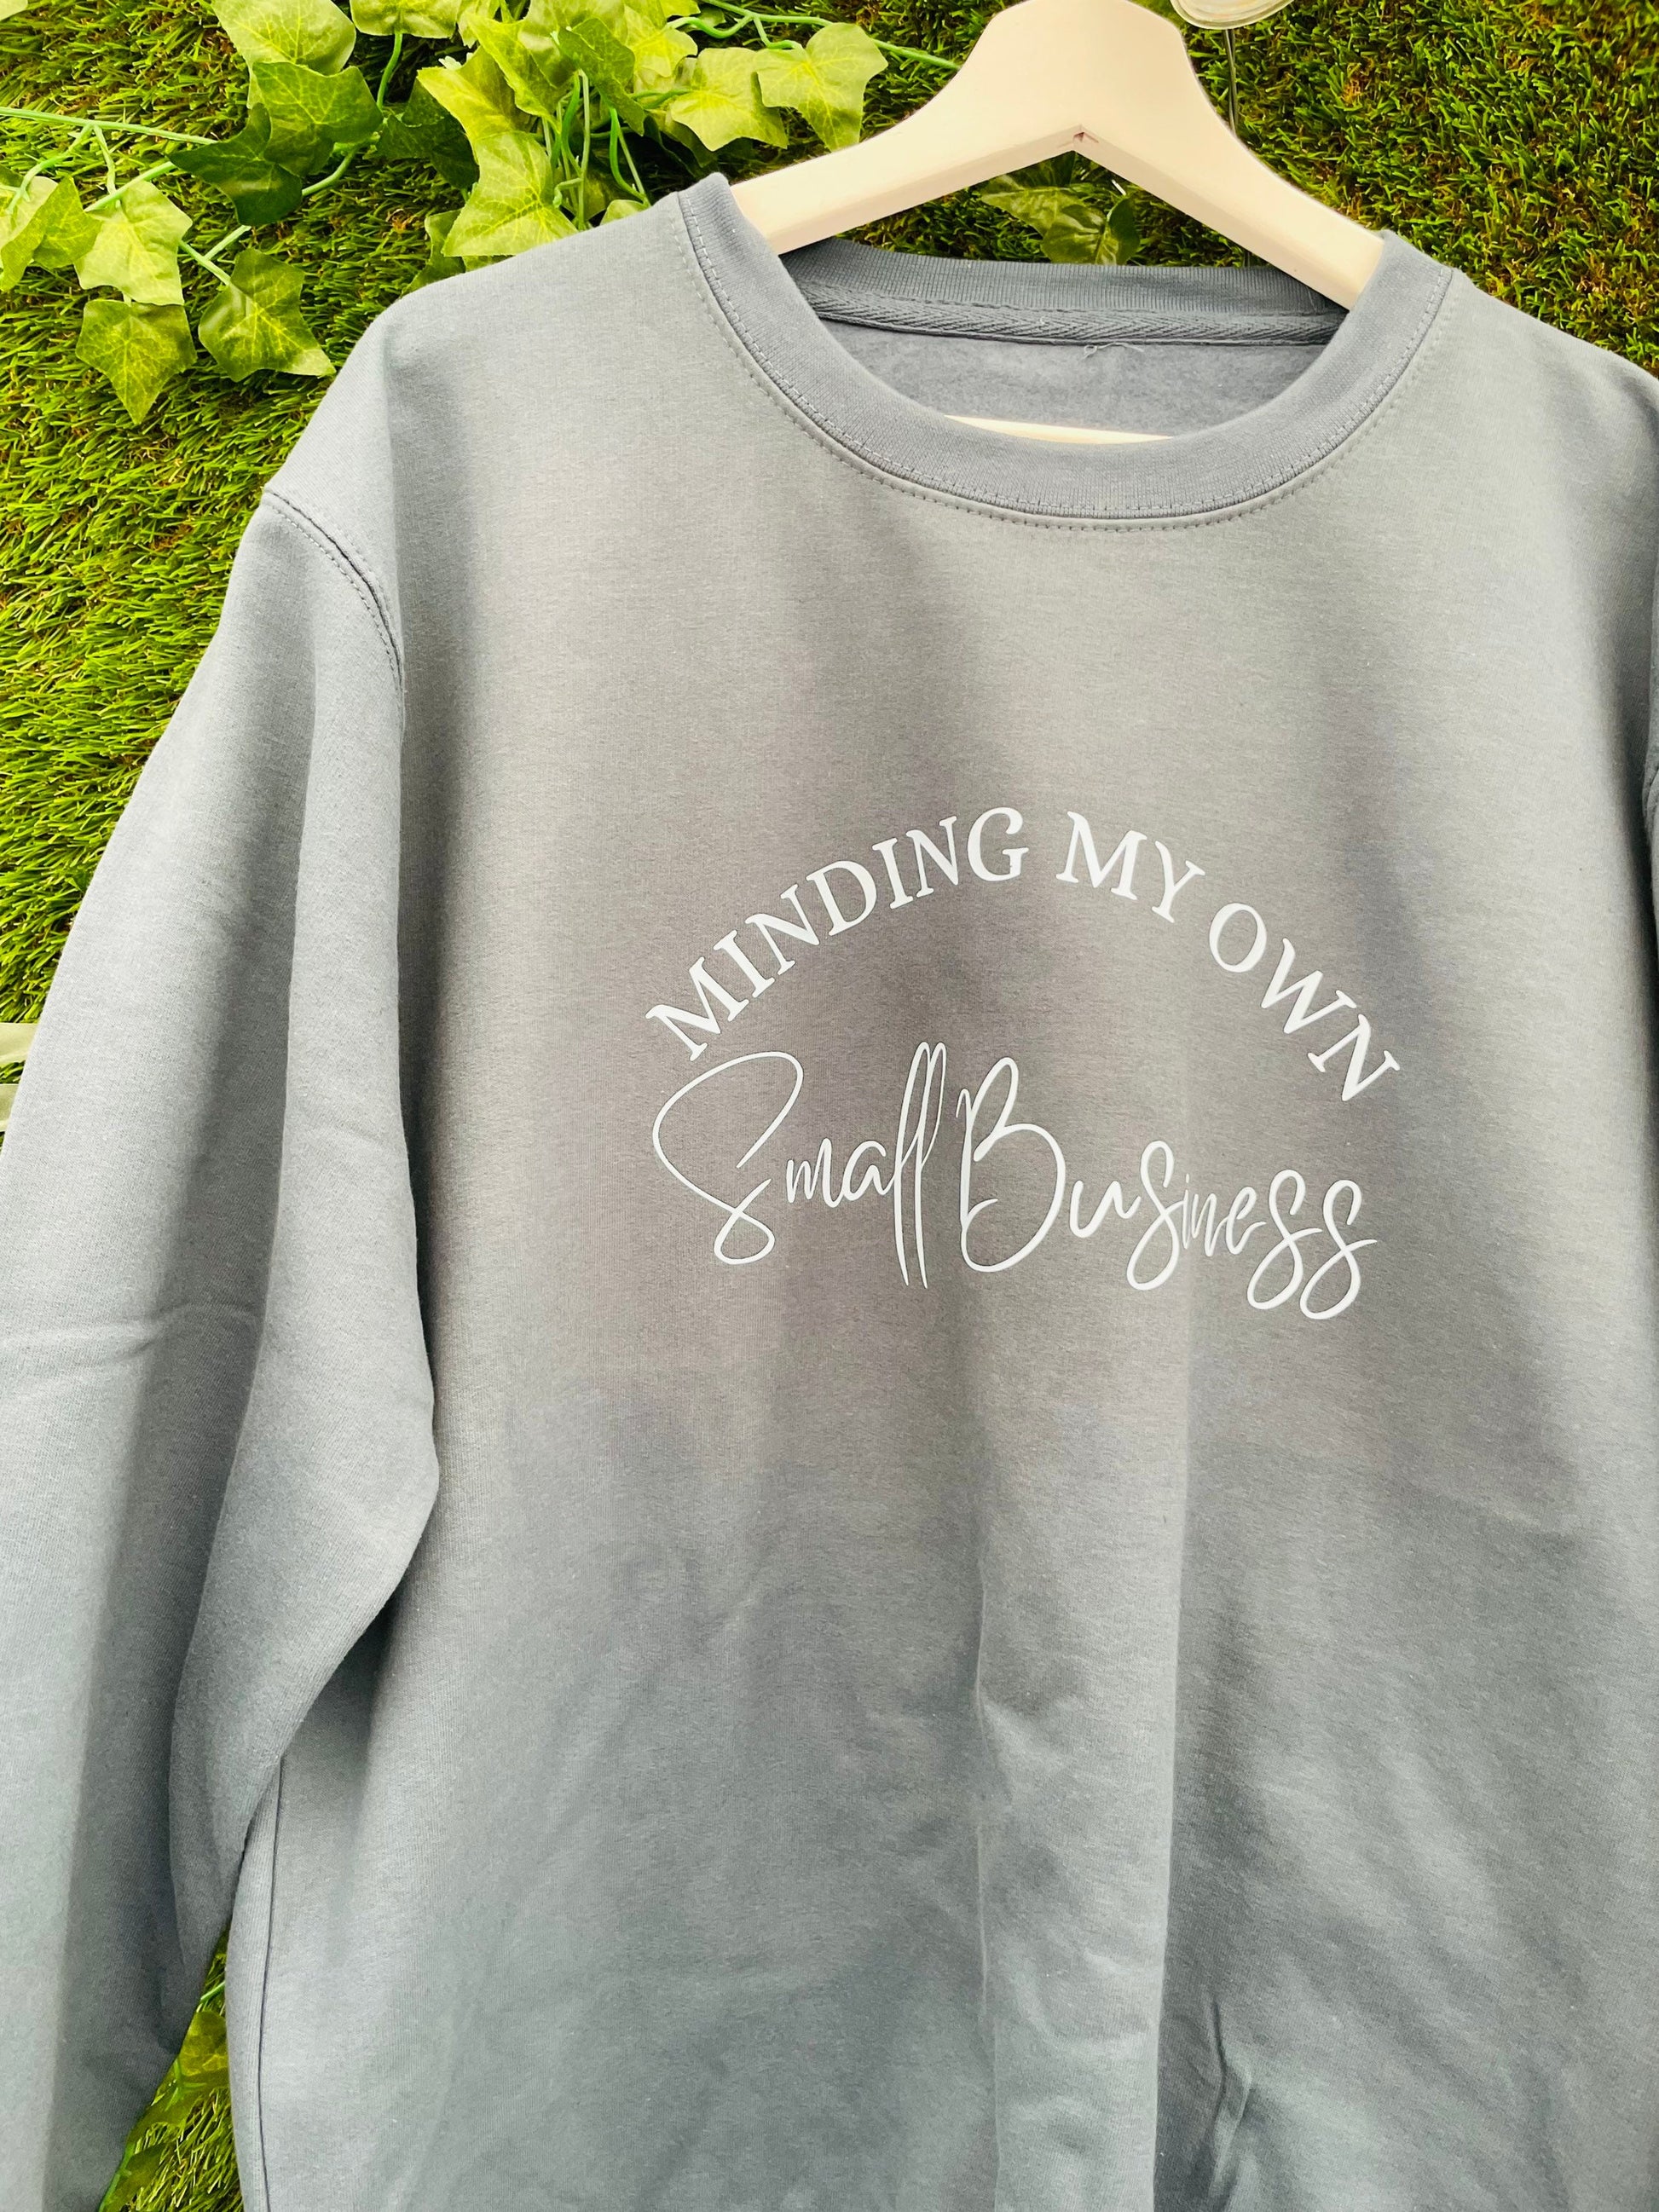 Minding My Own Small Business Slogan Sweatshirt | Shop Small | Business Owner | Small Business Big Heart Sweater